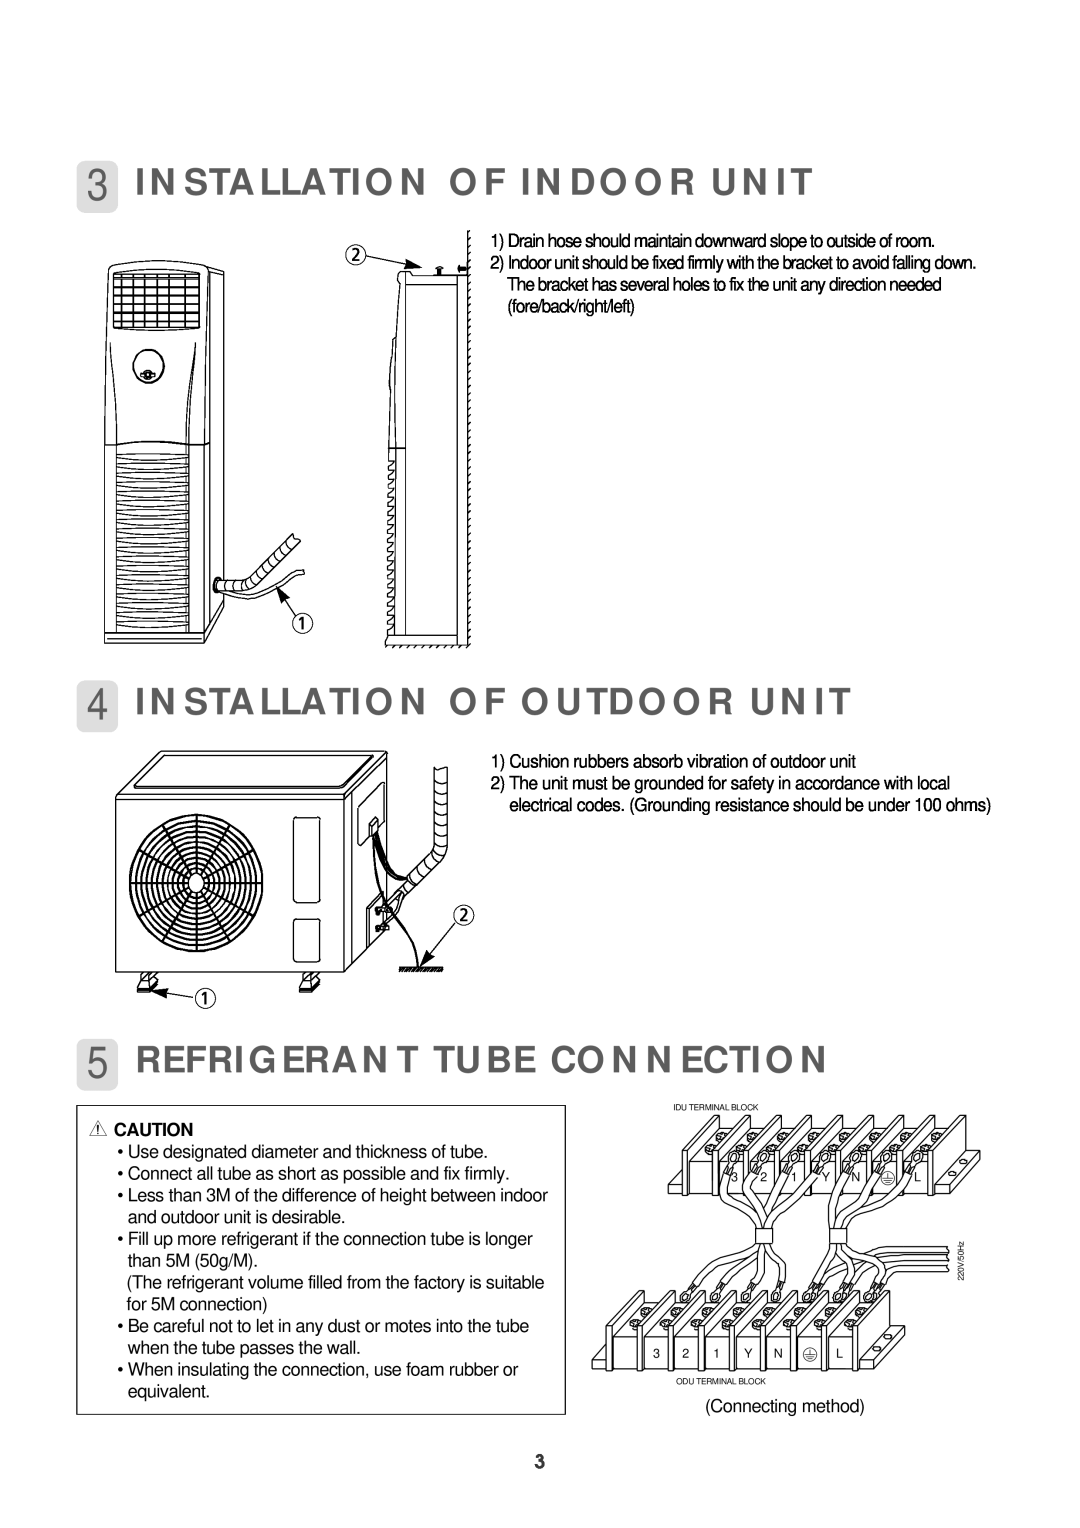 Daewoo DPB-280LH service manual 3INSTALLATION OF INDOOR UNIT, 4INSTALLATION OF OUTDOOR UNIT, 5REFRIGERANT TUBE CONNECTION 